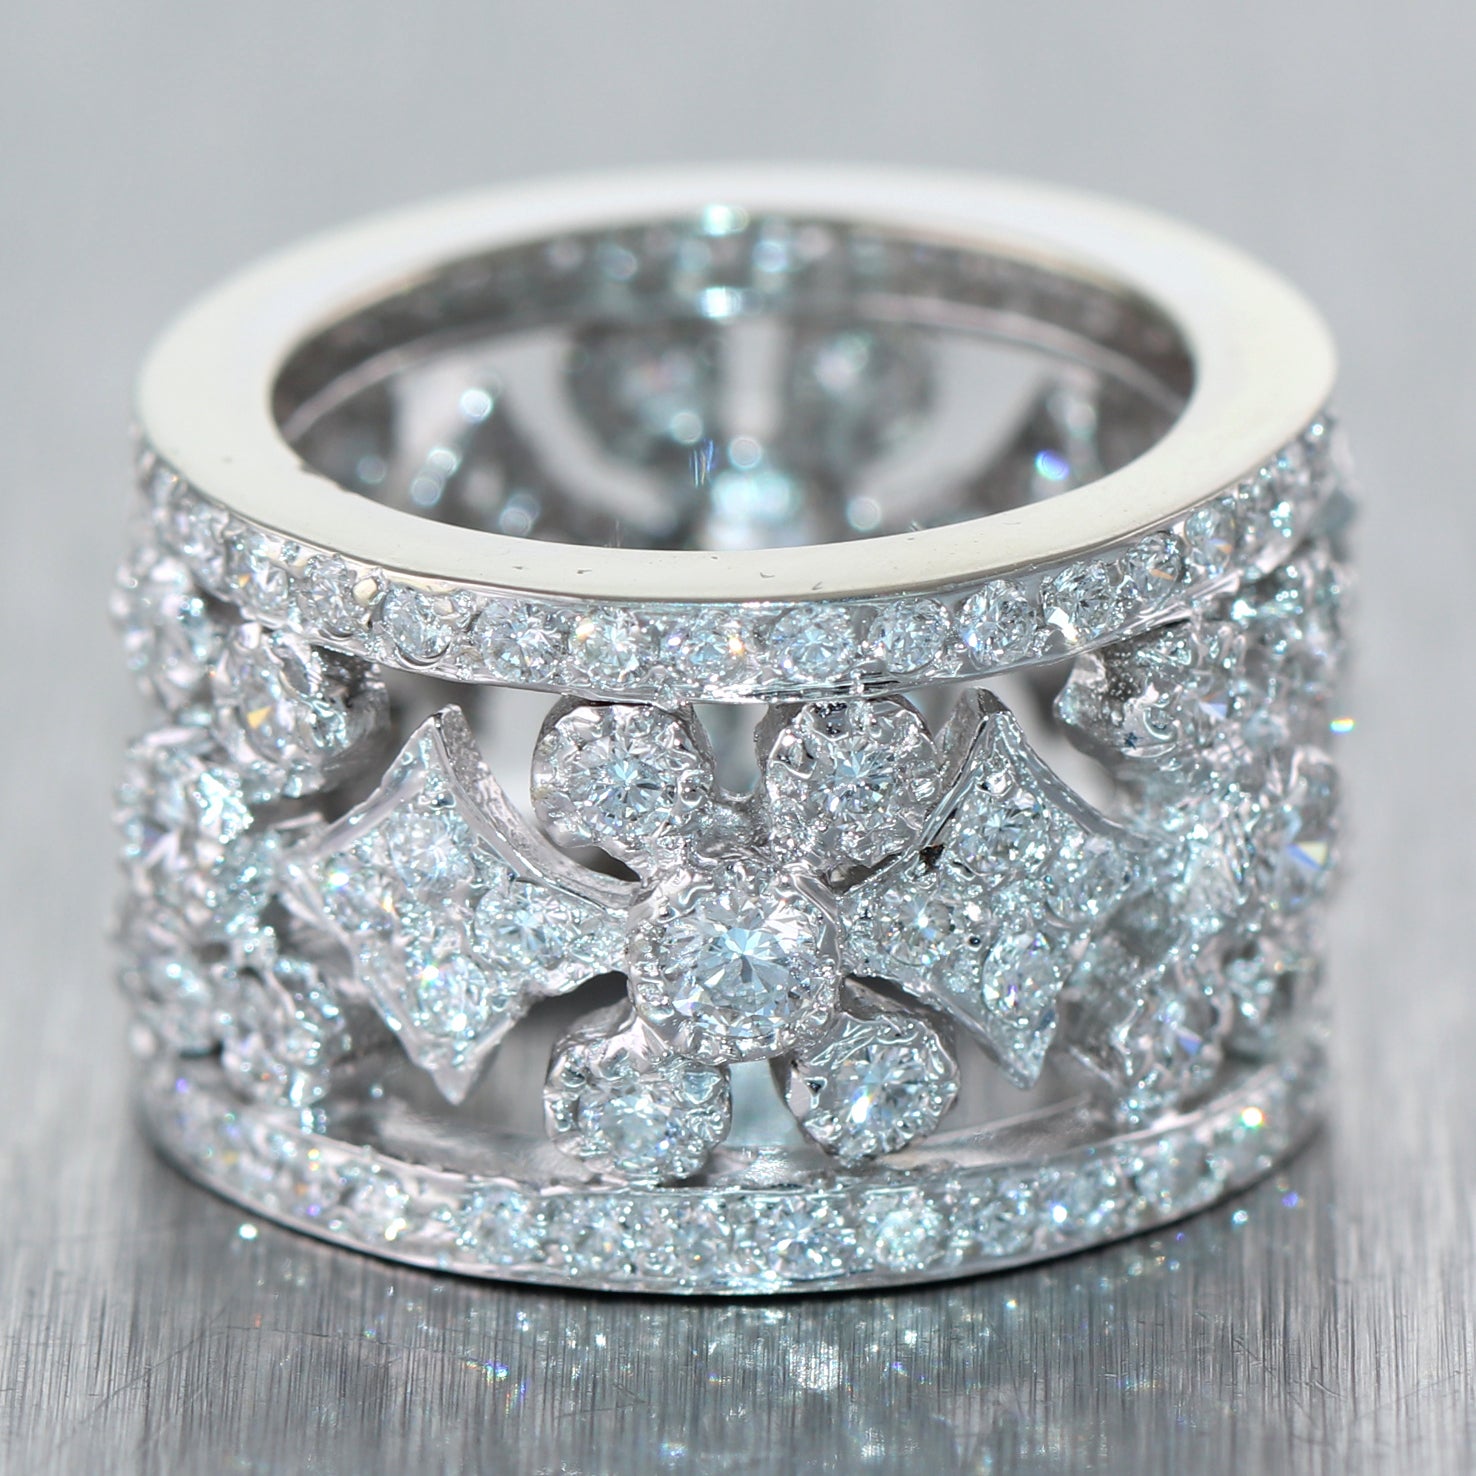 Aggregate 156+ wide diamond engagement rings latest